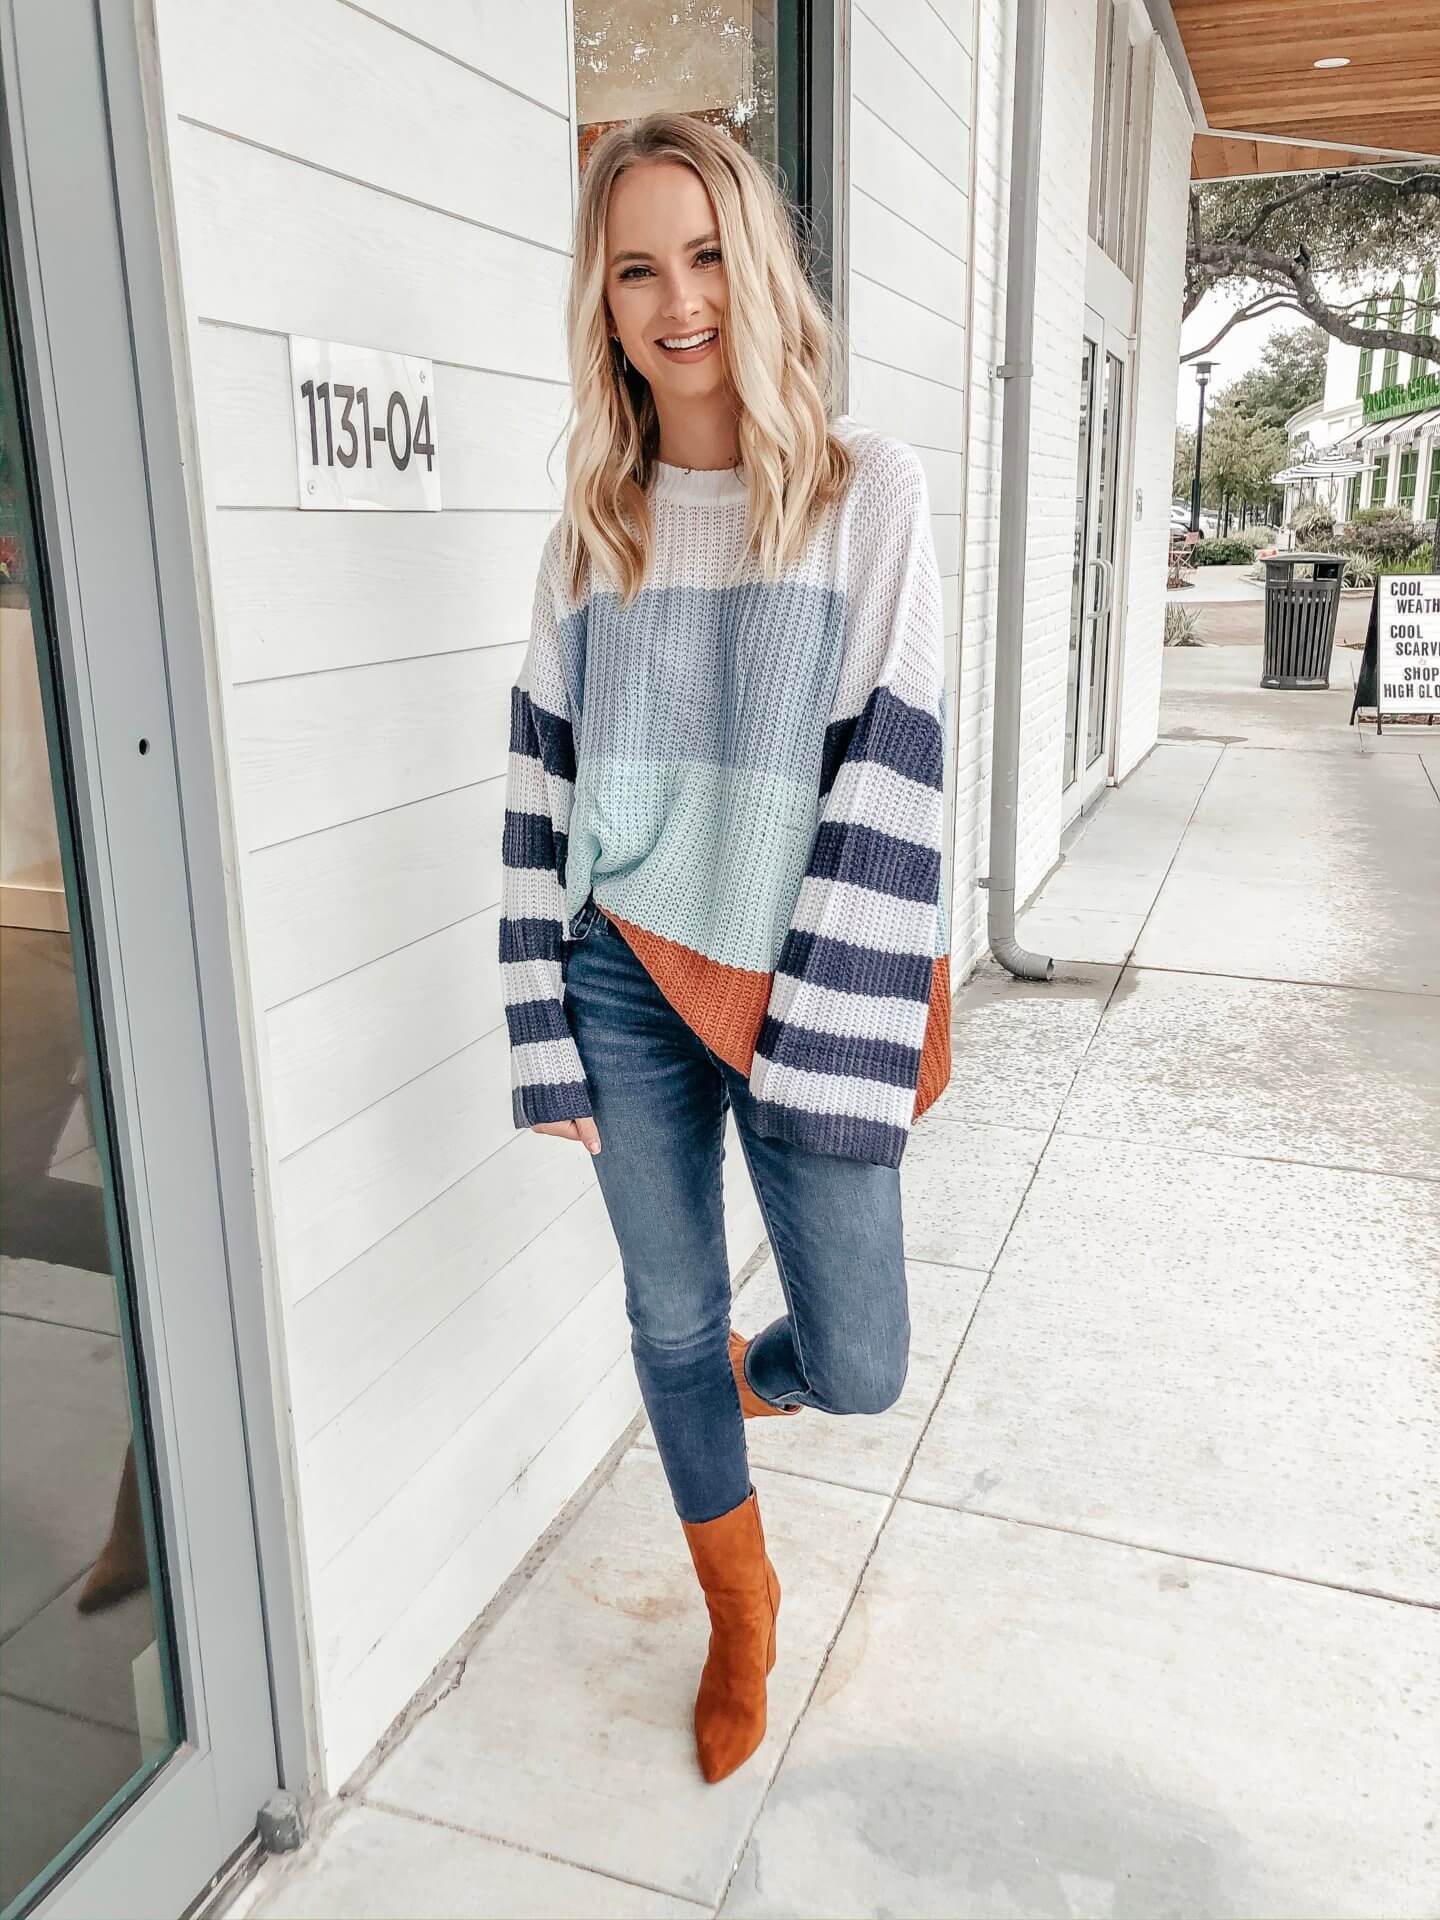 Thanksgiving outfit ideas 2019. Casual Thanksgiving ideas. What to wear this year for Thanksgiving. The Blonder Life